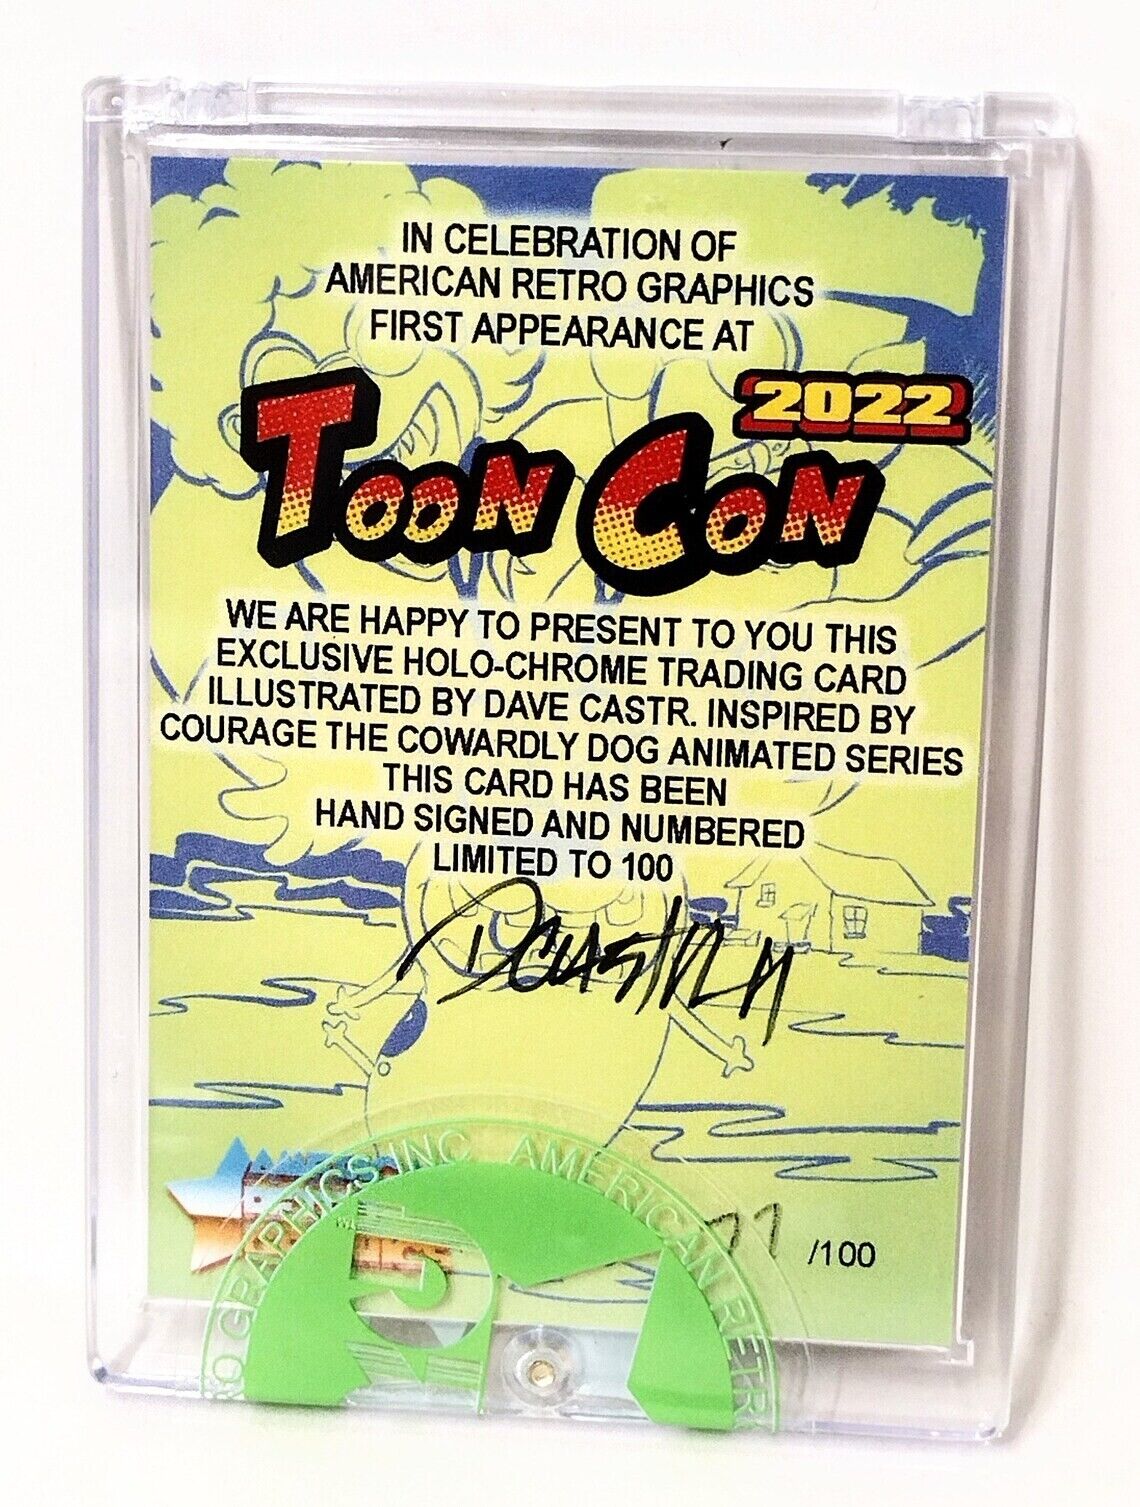 Toon Con 2022 Convention Exclusive, Courage the Cowardly Dog Holochrome trading